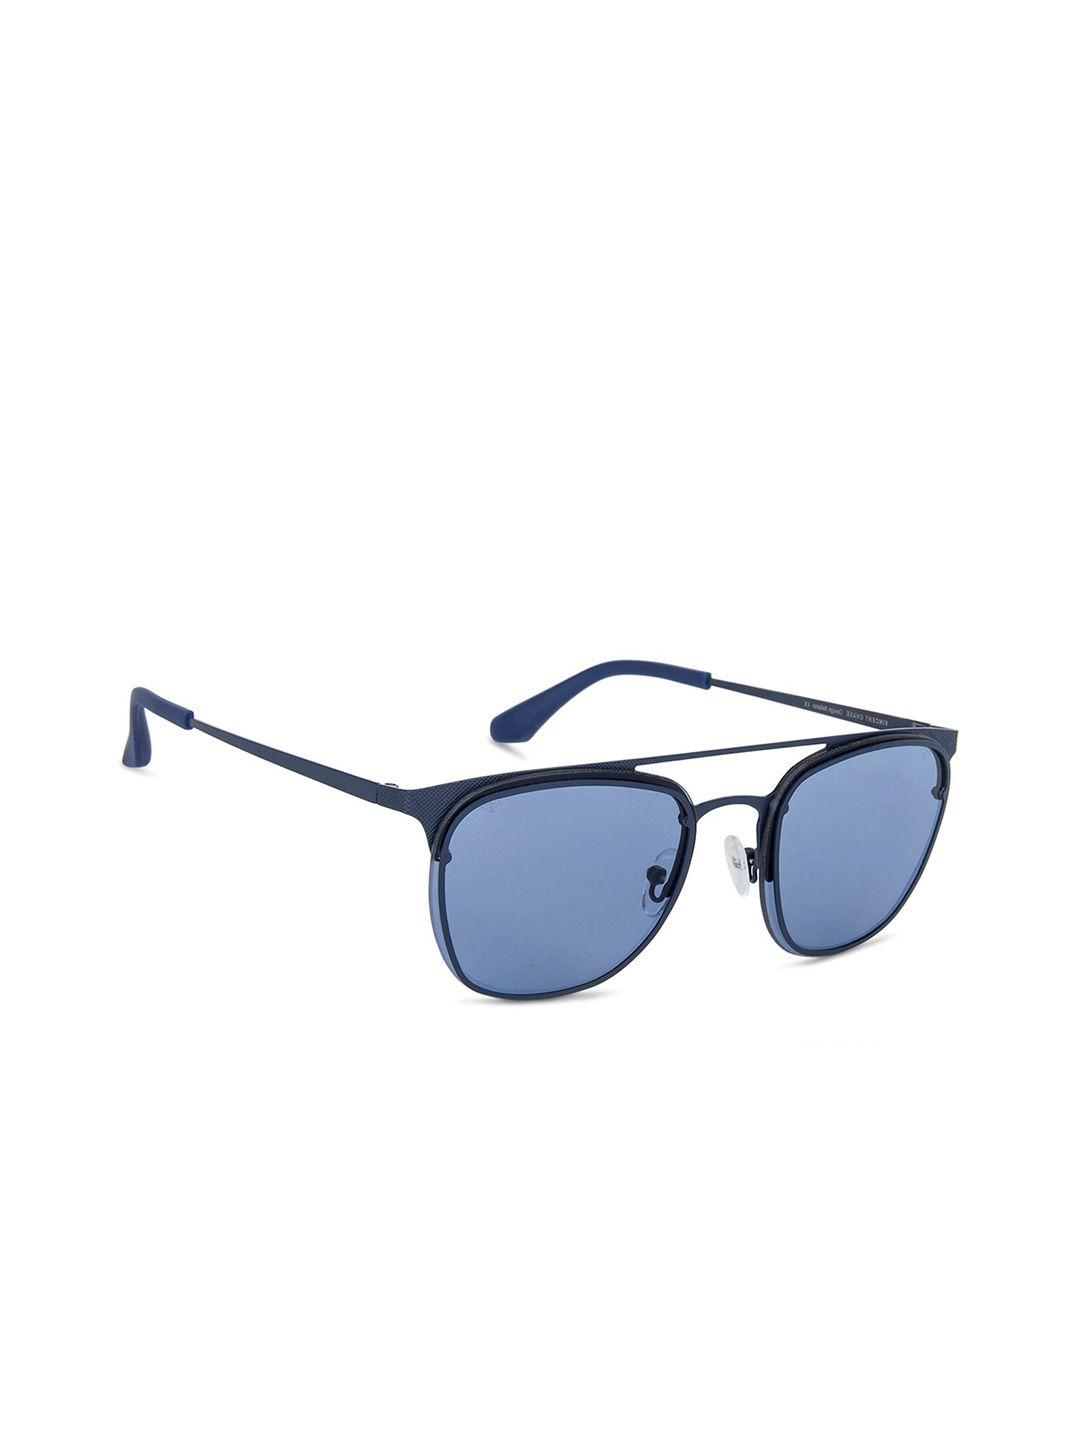 vincent chase unisex blue lens & blue other sunglasses with uv protected lens